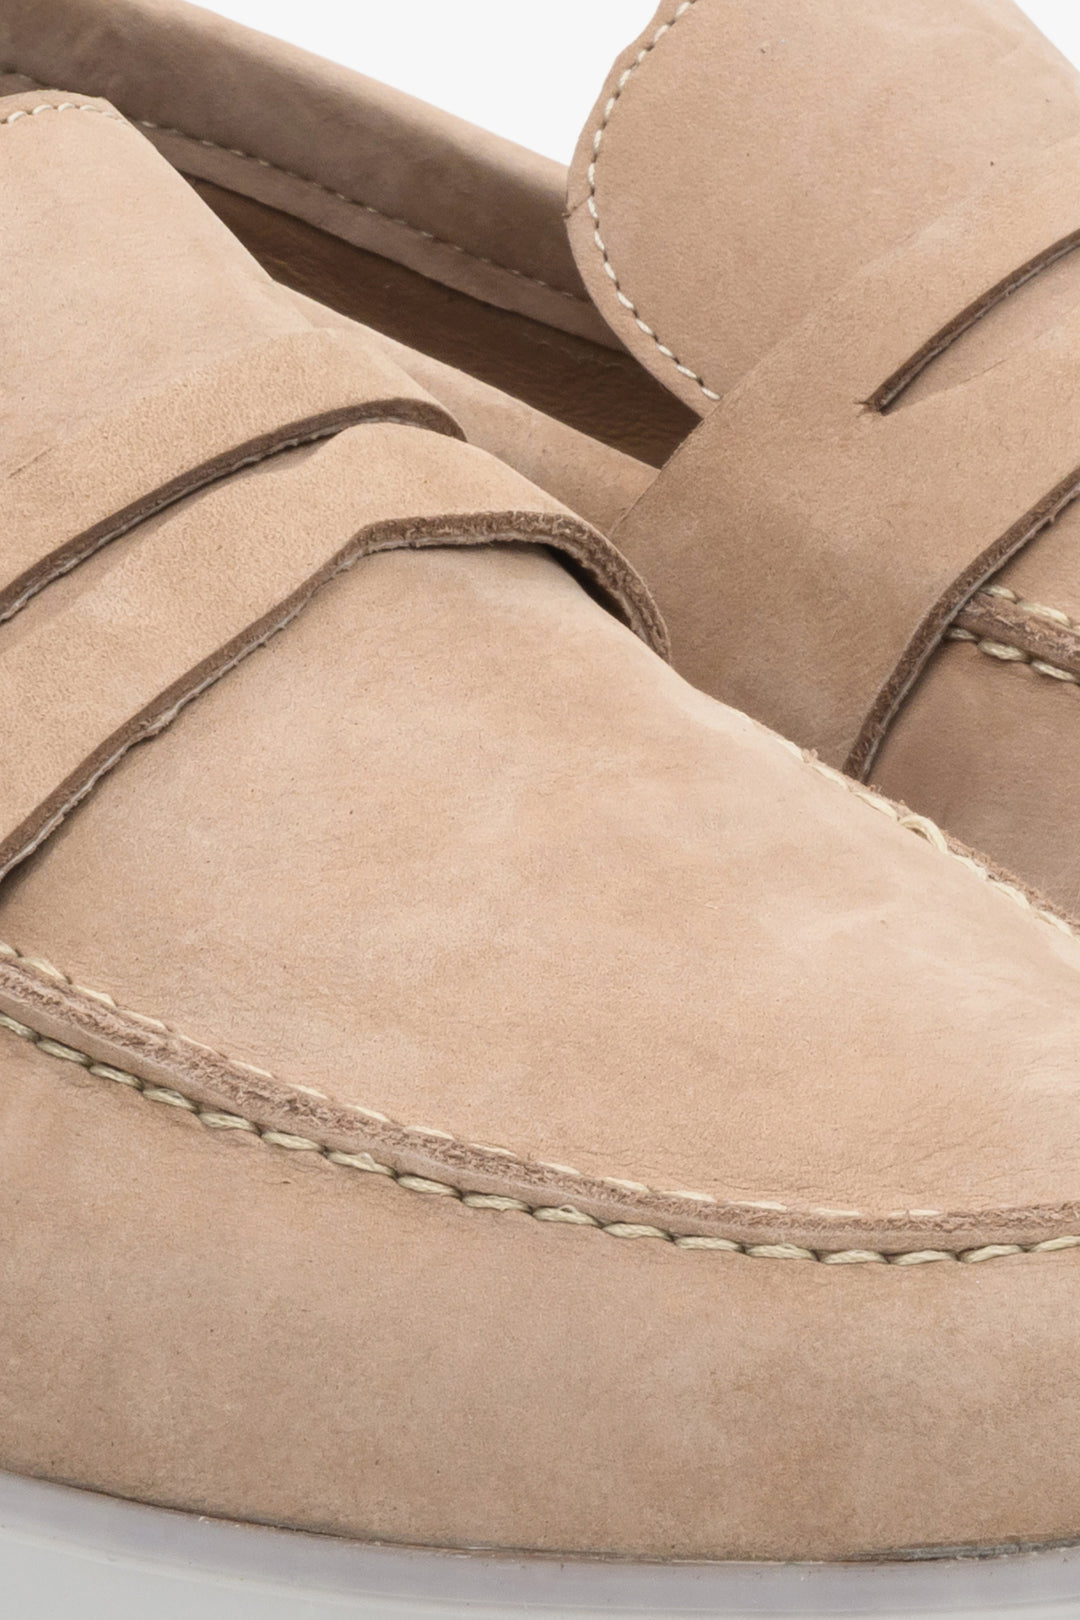 Beige nubuck men's moccasins by Estro - close-up on the stitching pattern.